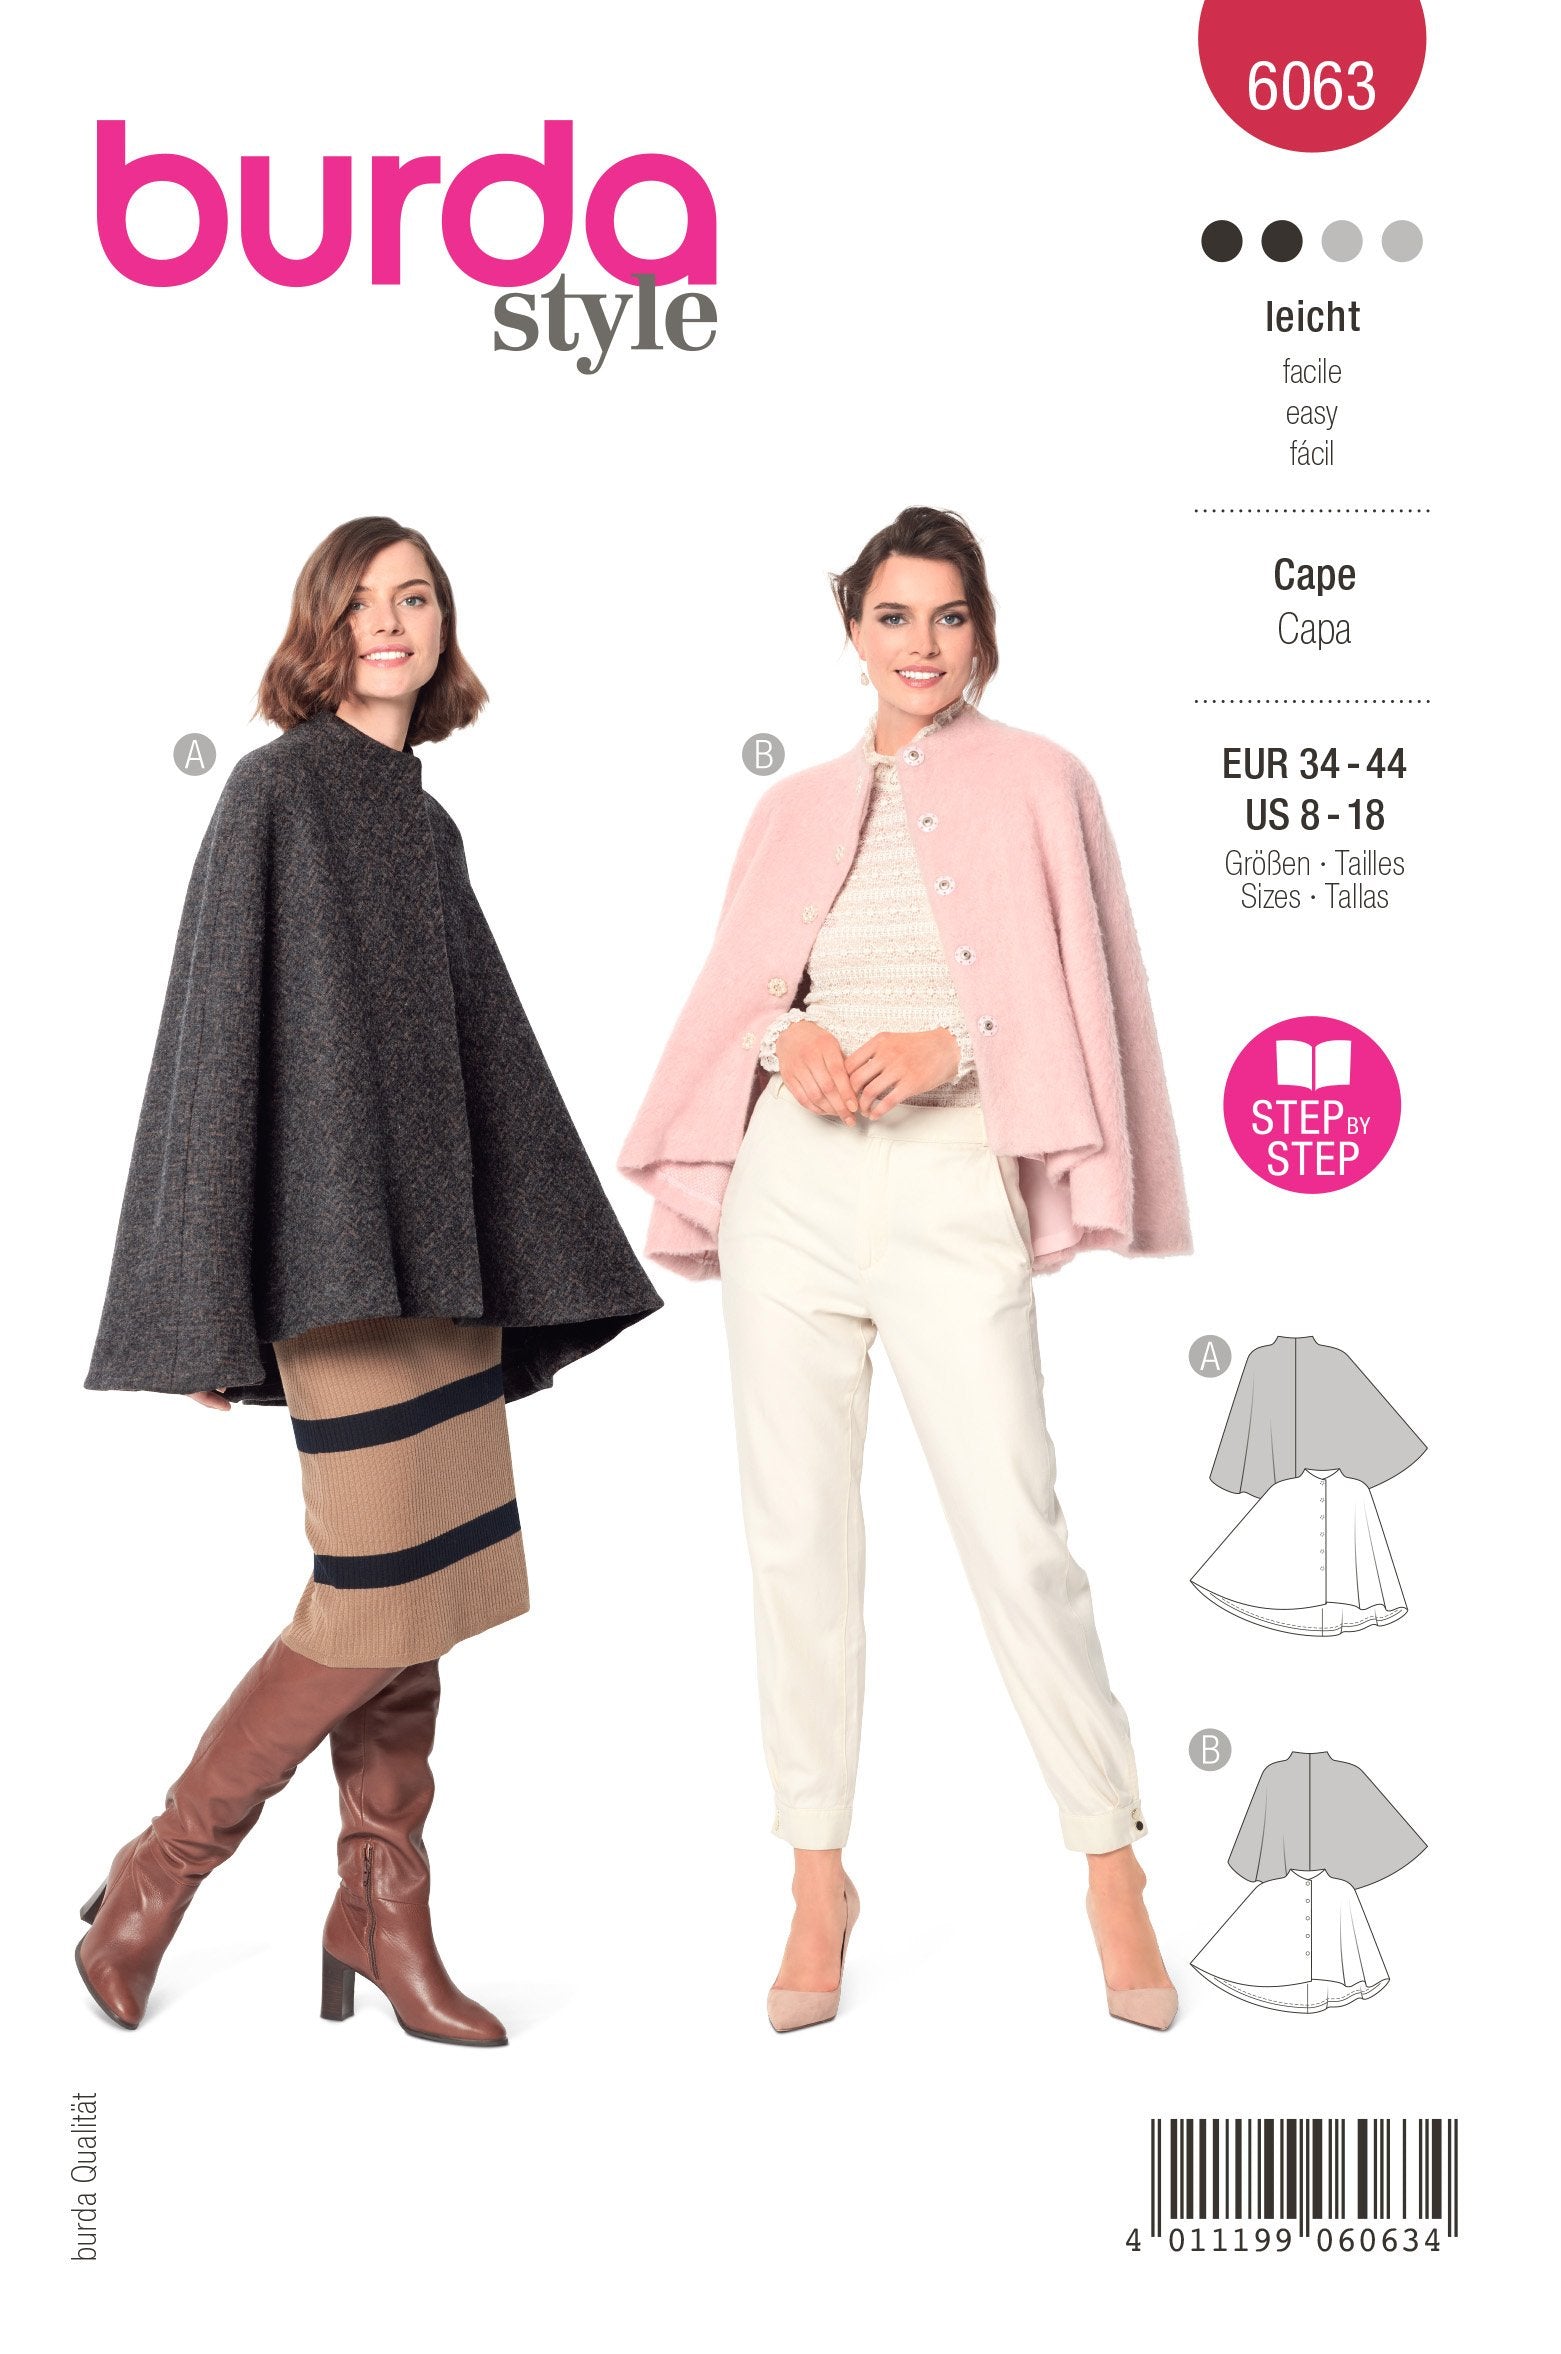 Burda Sewing Pattern 6063 Cape from Jaycotts Sewing Supplies